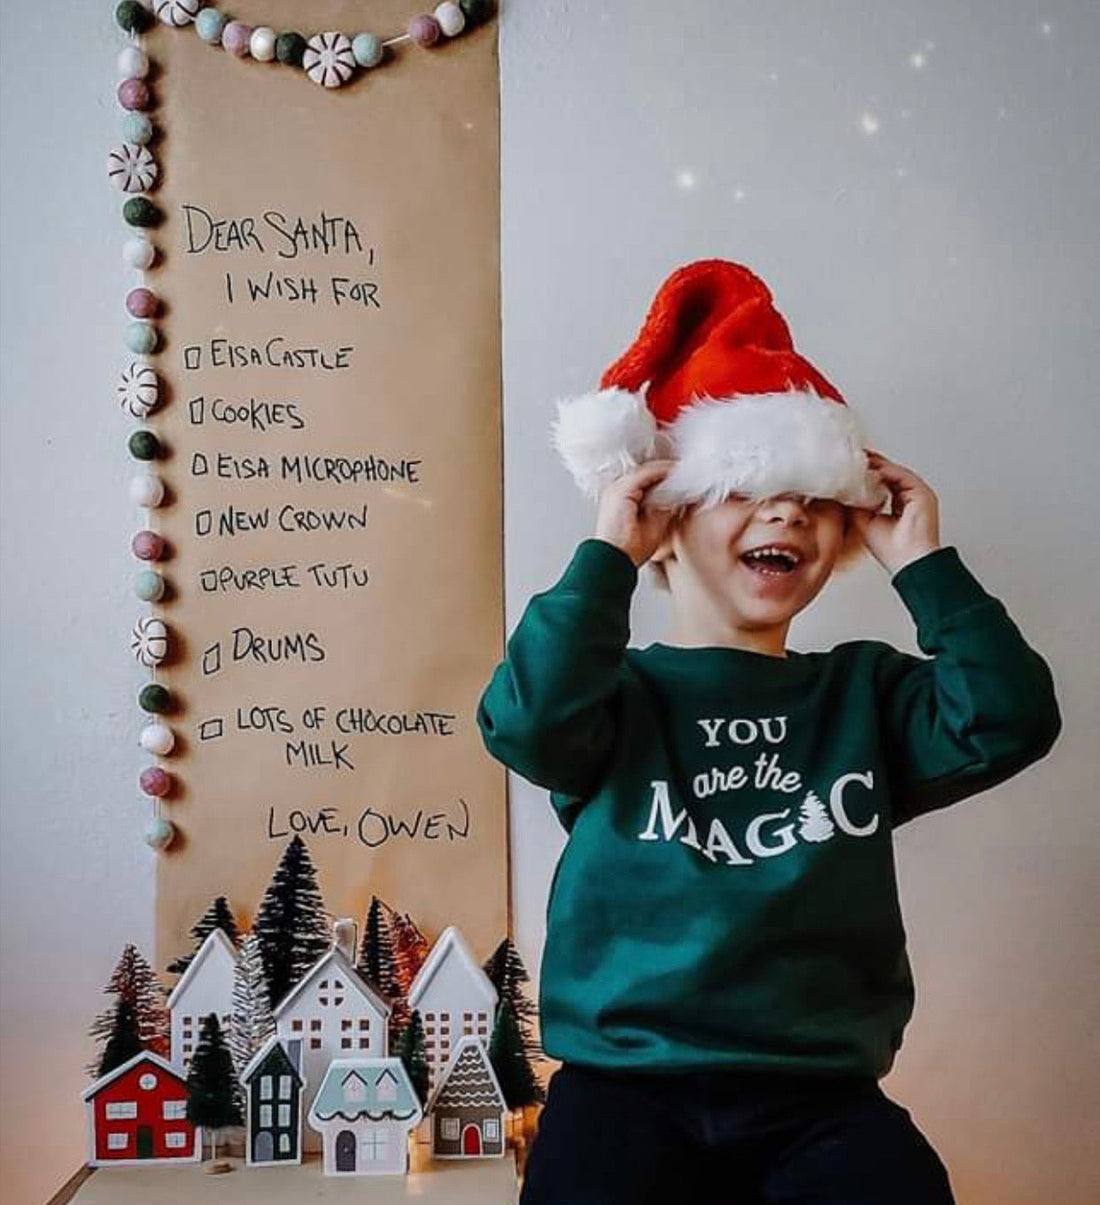 5 tips for dressing your child through the holidays!